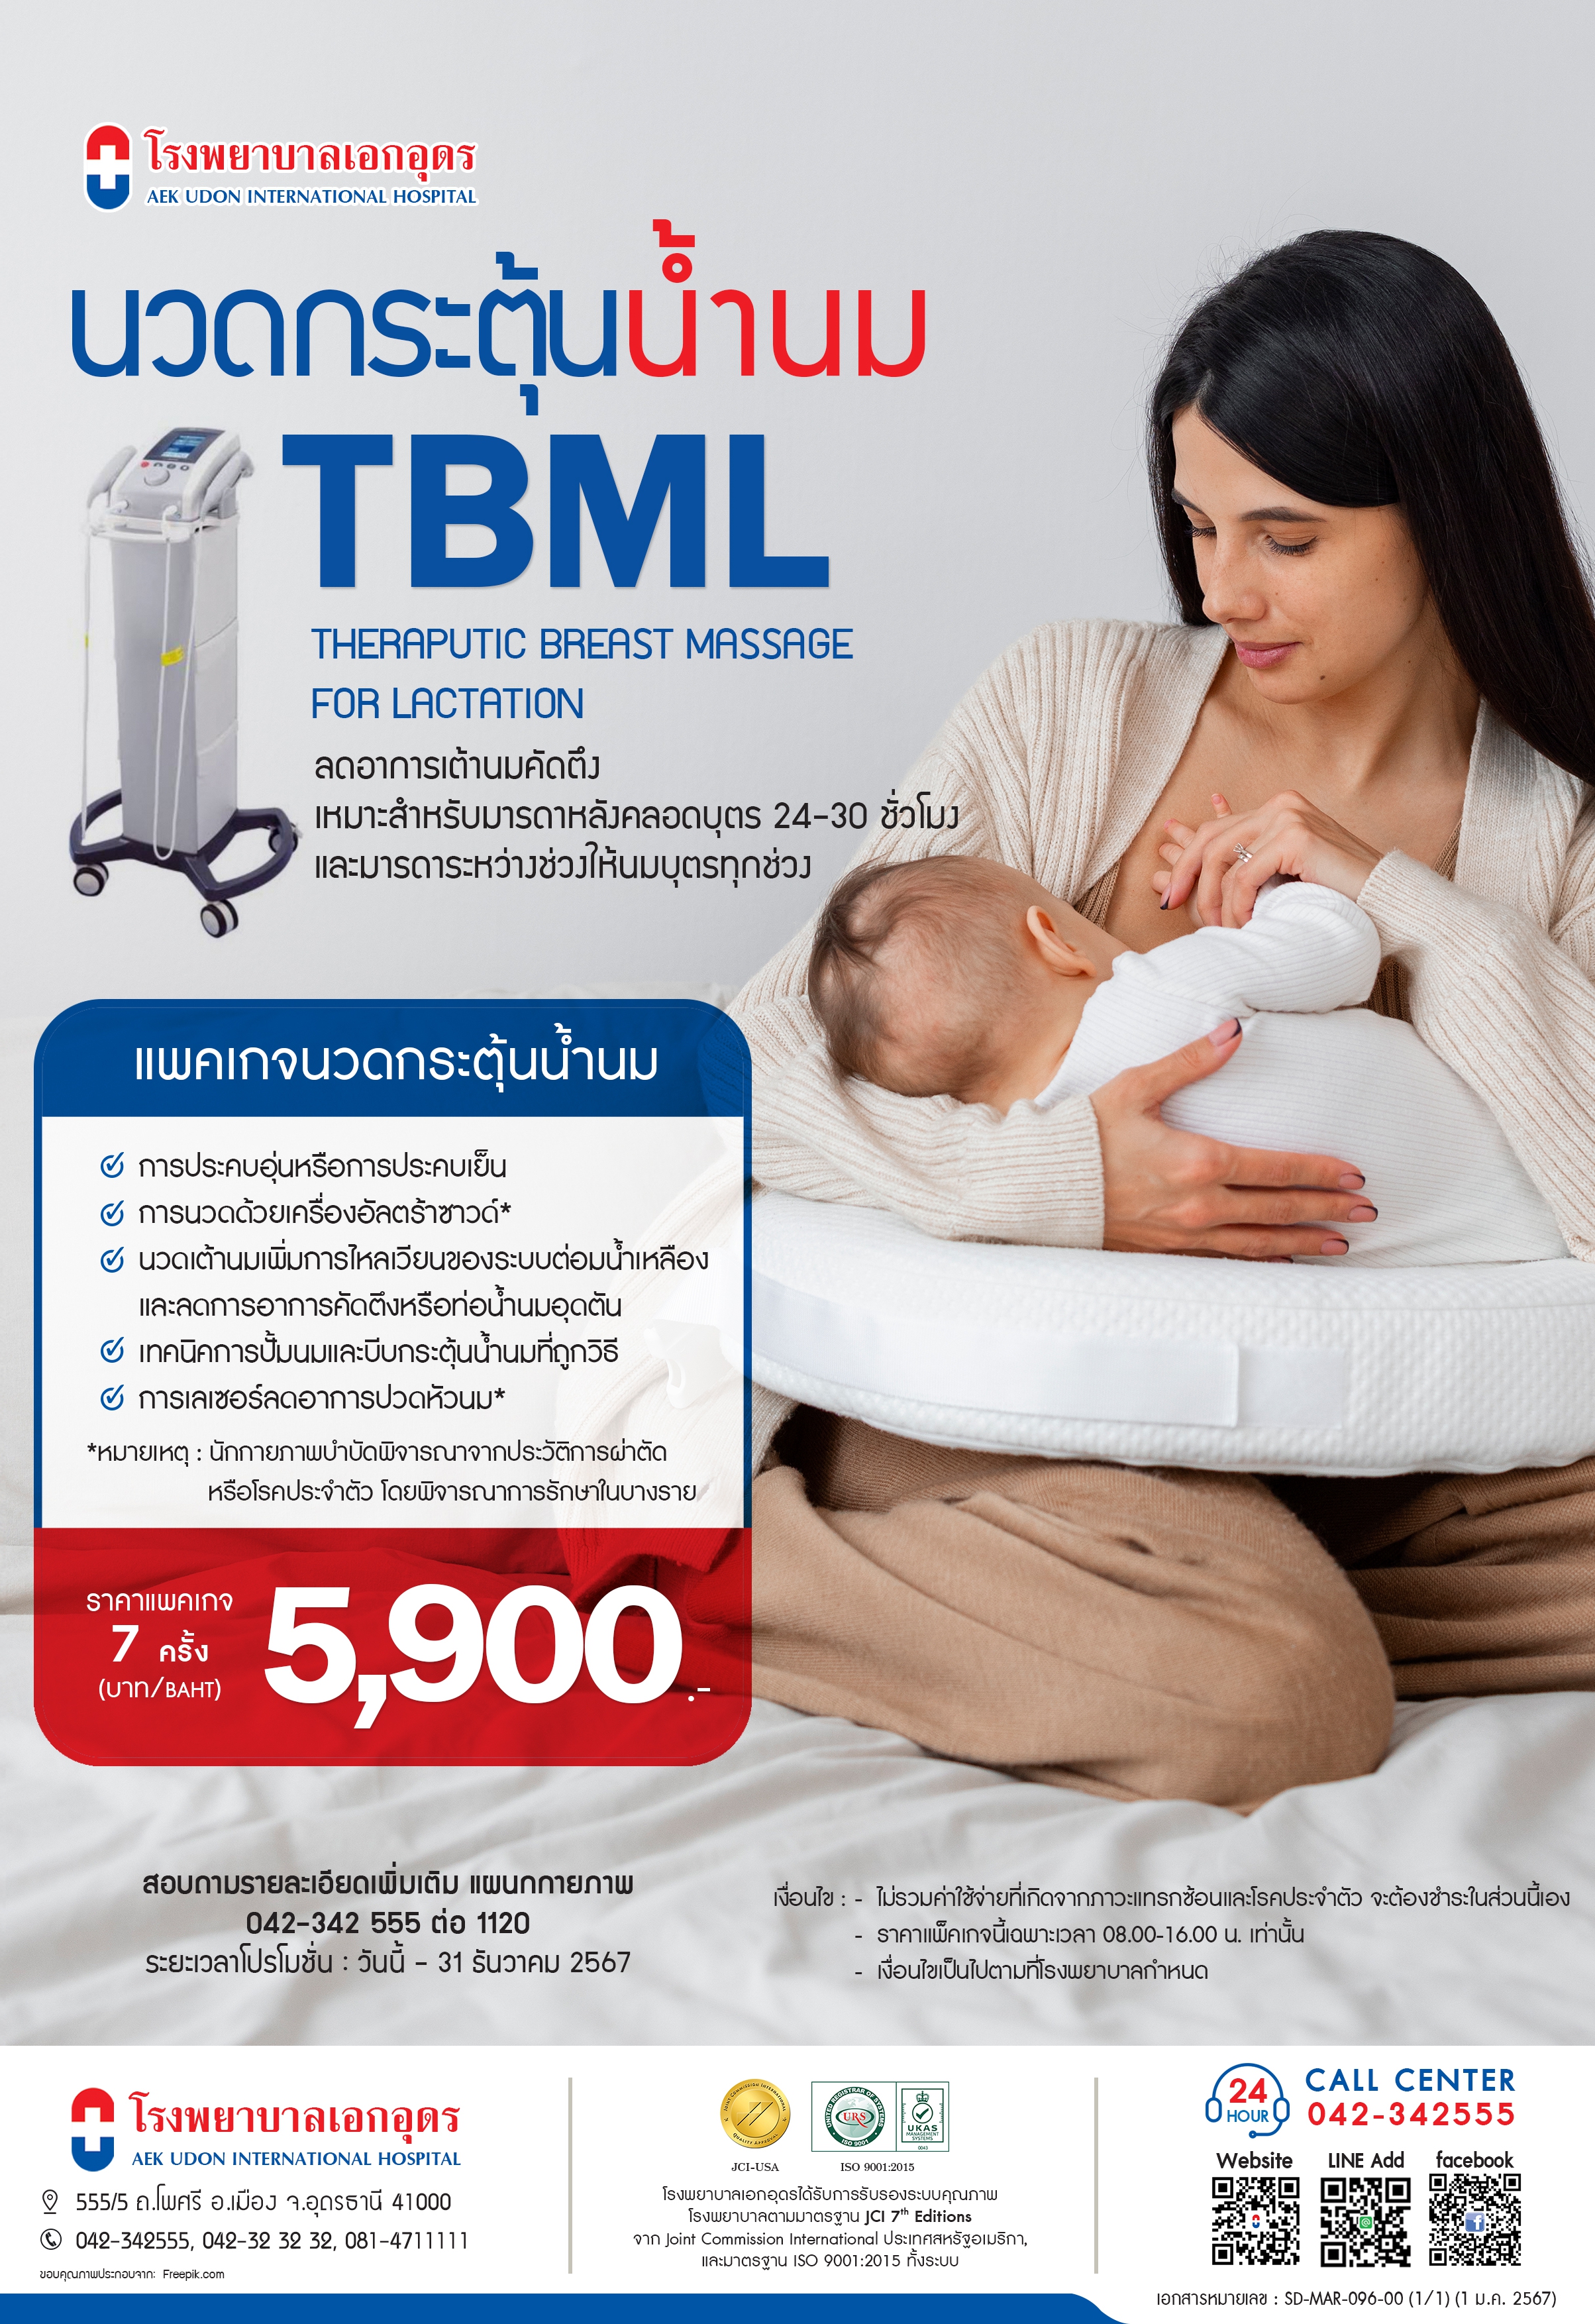 TBML - THERAPUTIC BREAST MASSAGE FOR LACTATION